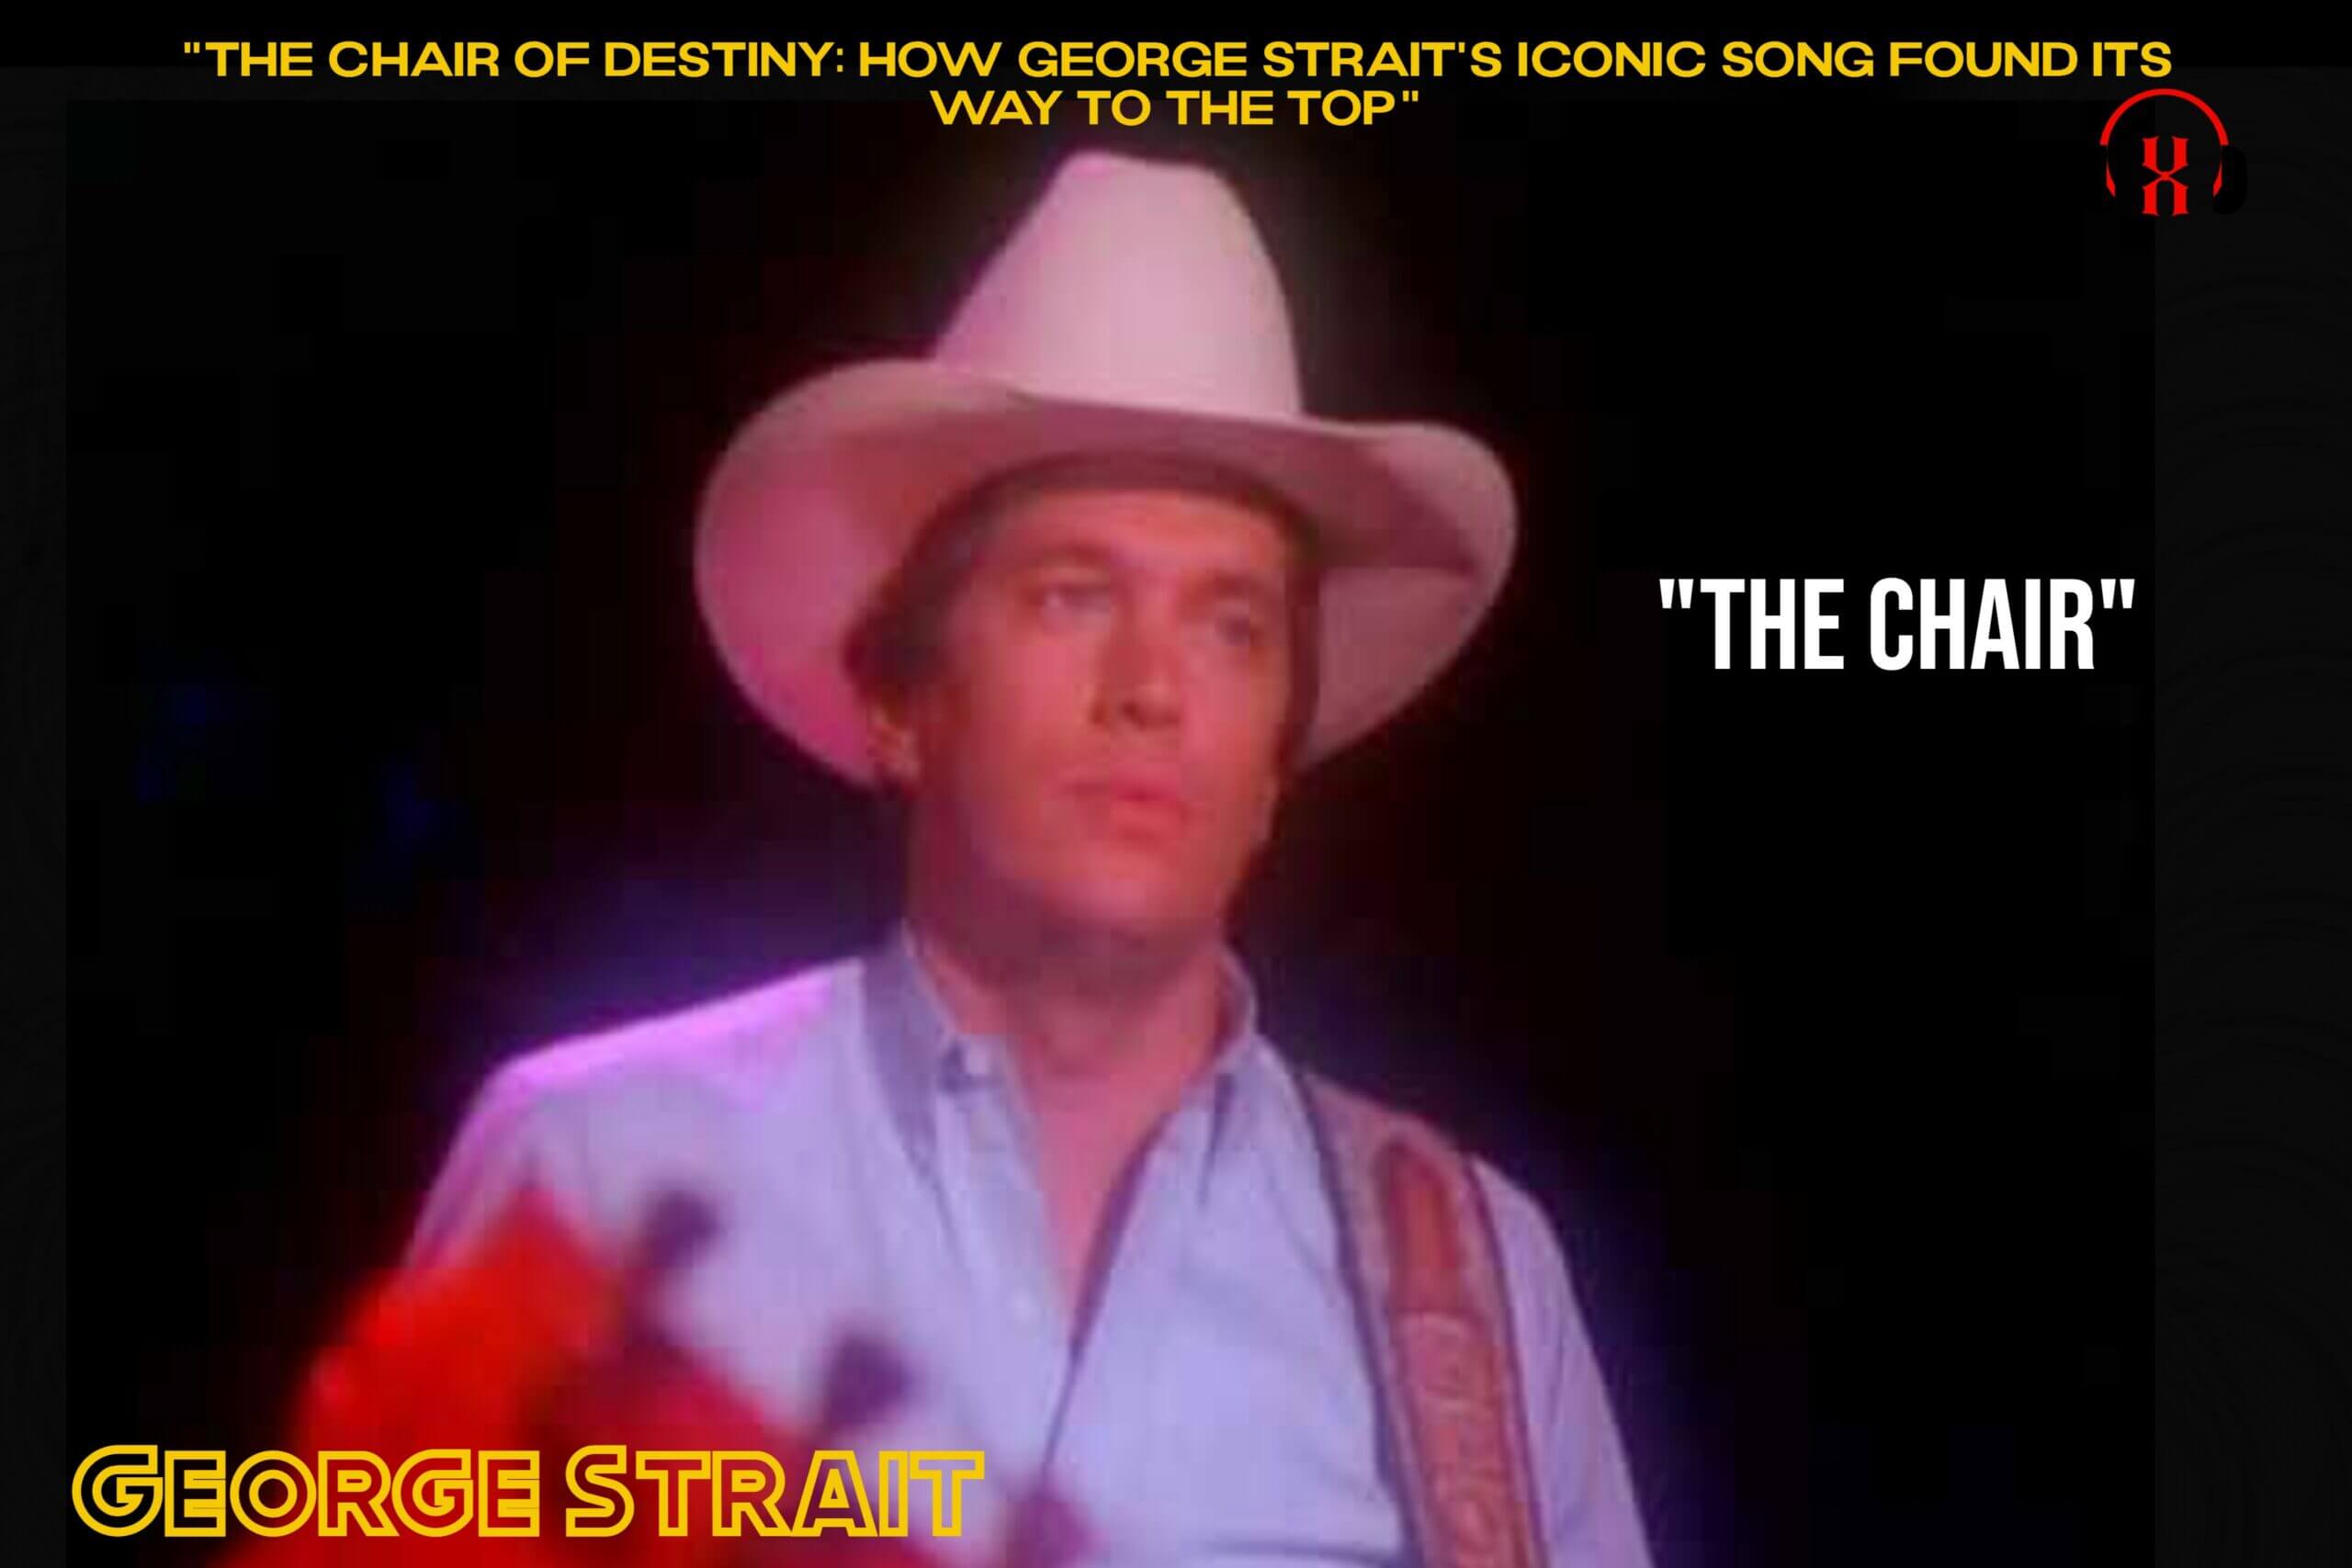 “The Chair of Destiny: How George Strait’s Iconic Song Found its Way to the Top”